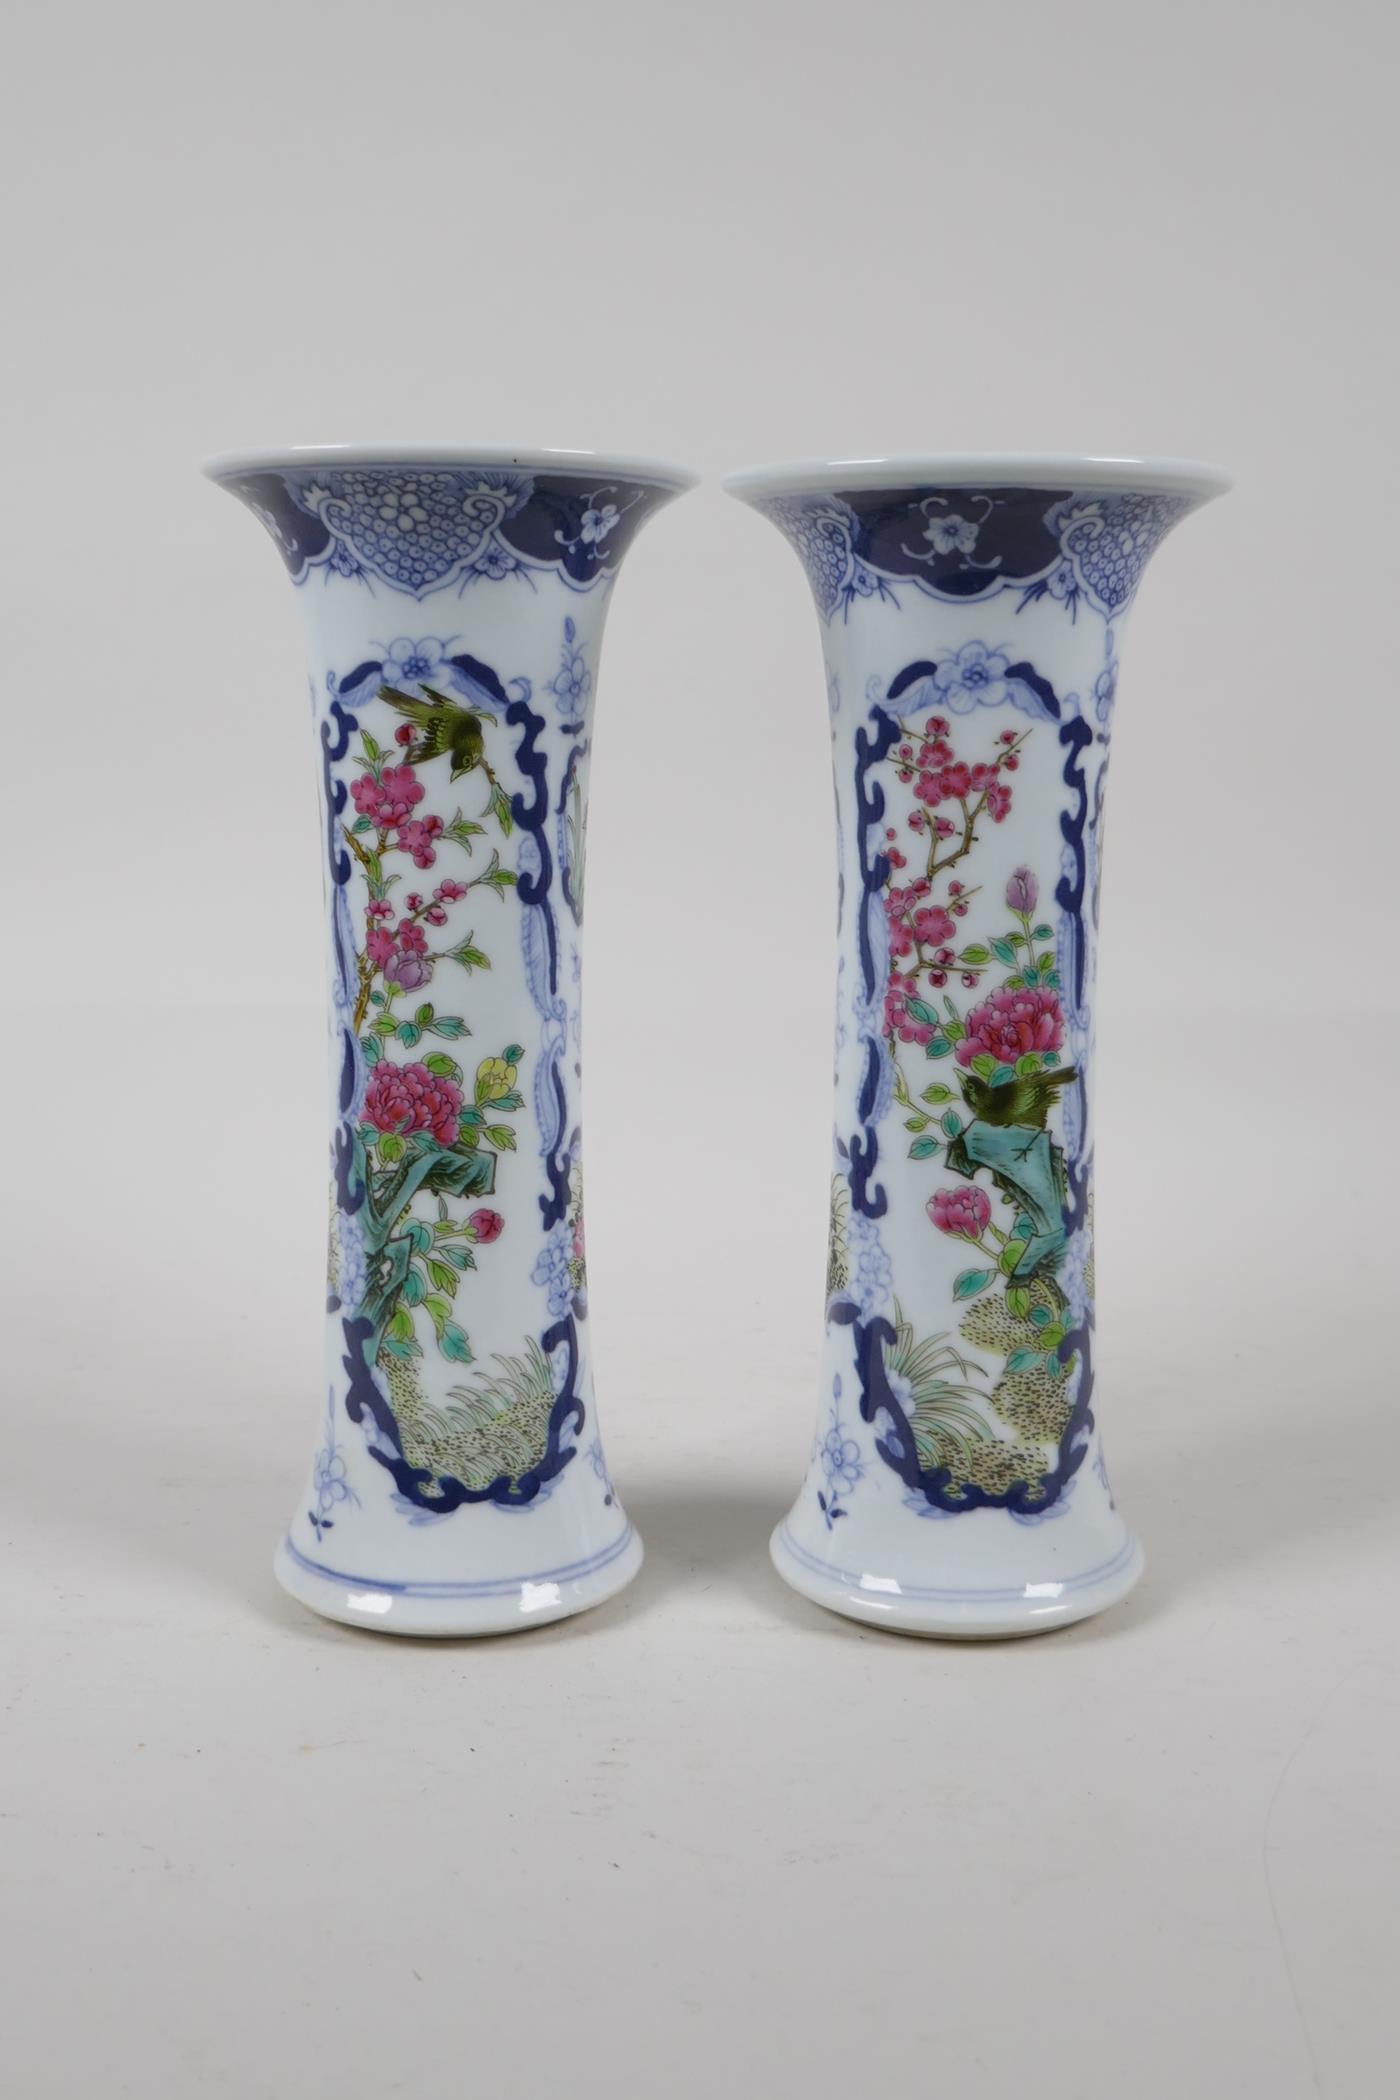 A pair of early C20th Chinese blue and white porcelain stem vases with decorative famille verte